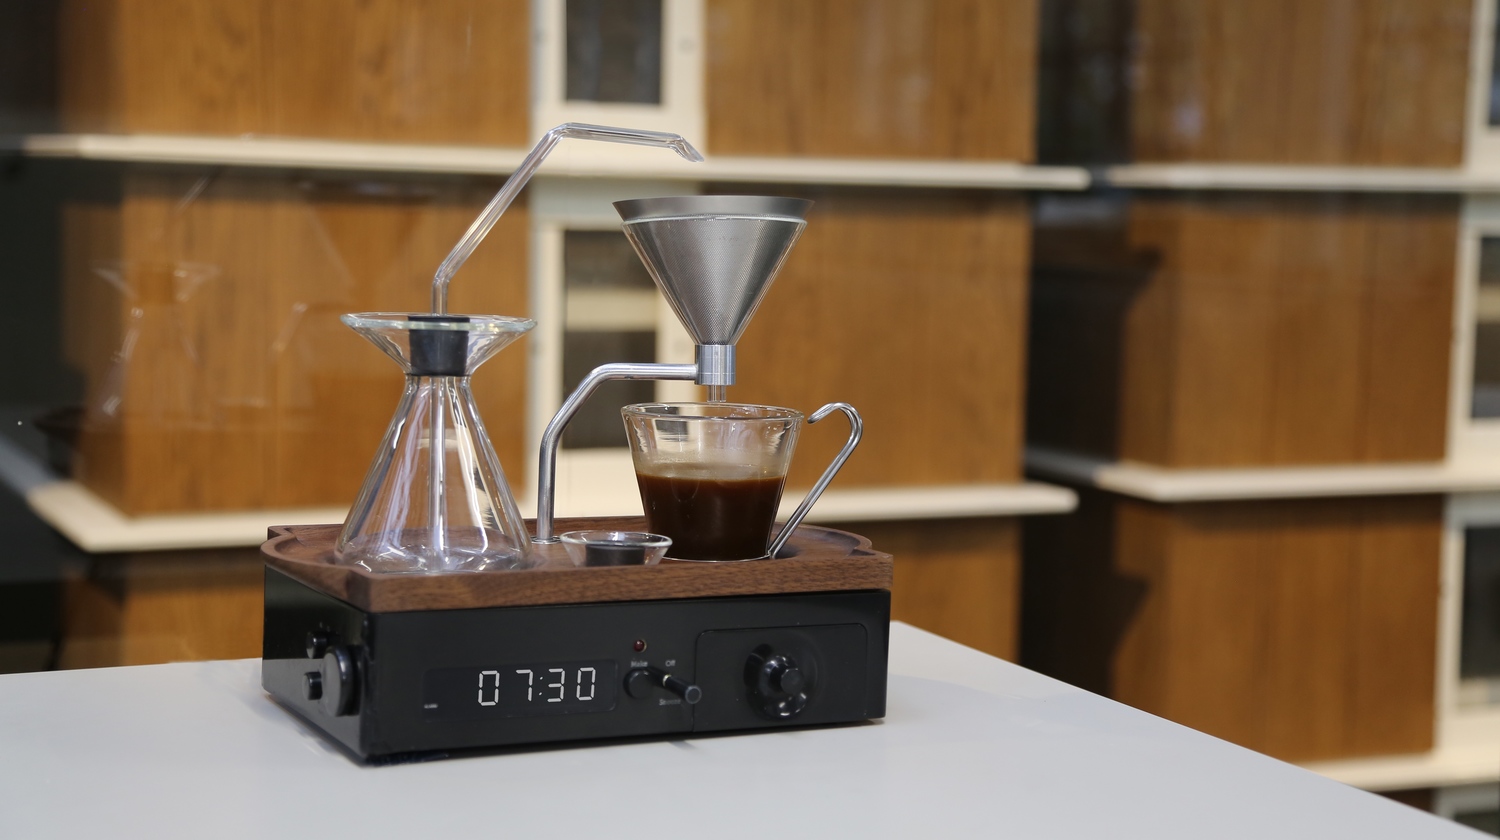 This Coffee Maker Alarm Clock Is What Your Morning Deserves